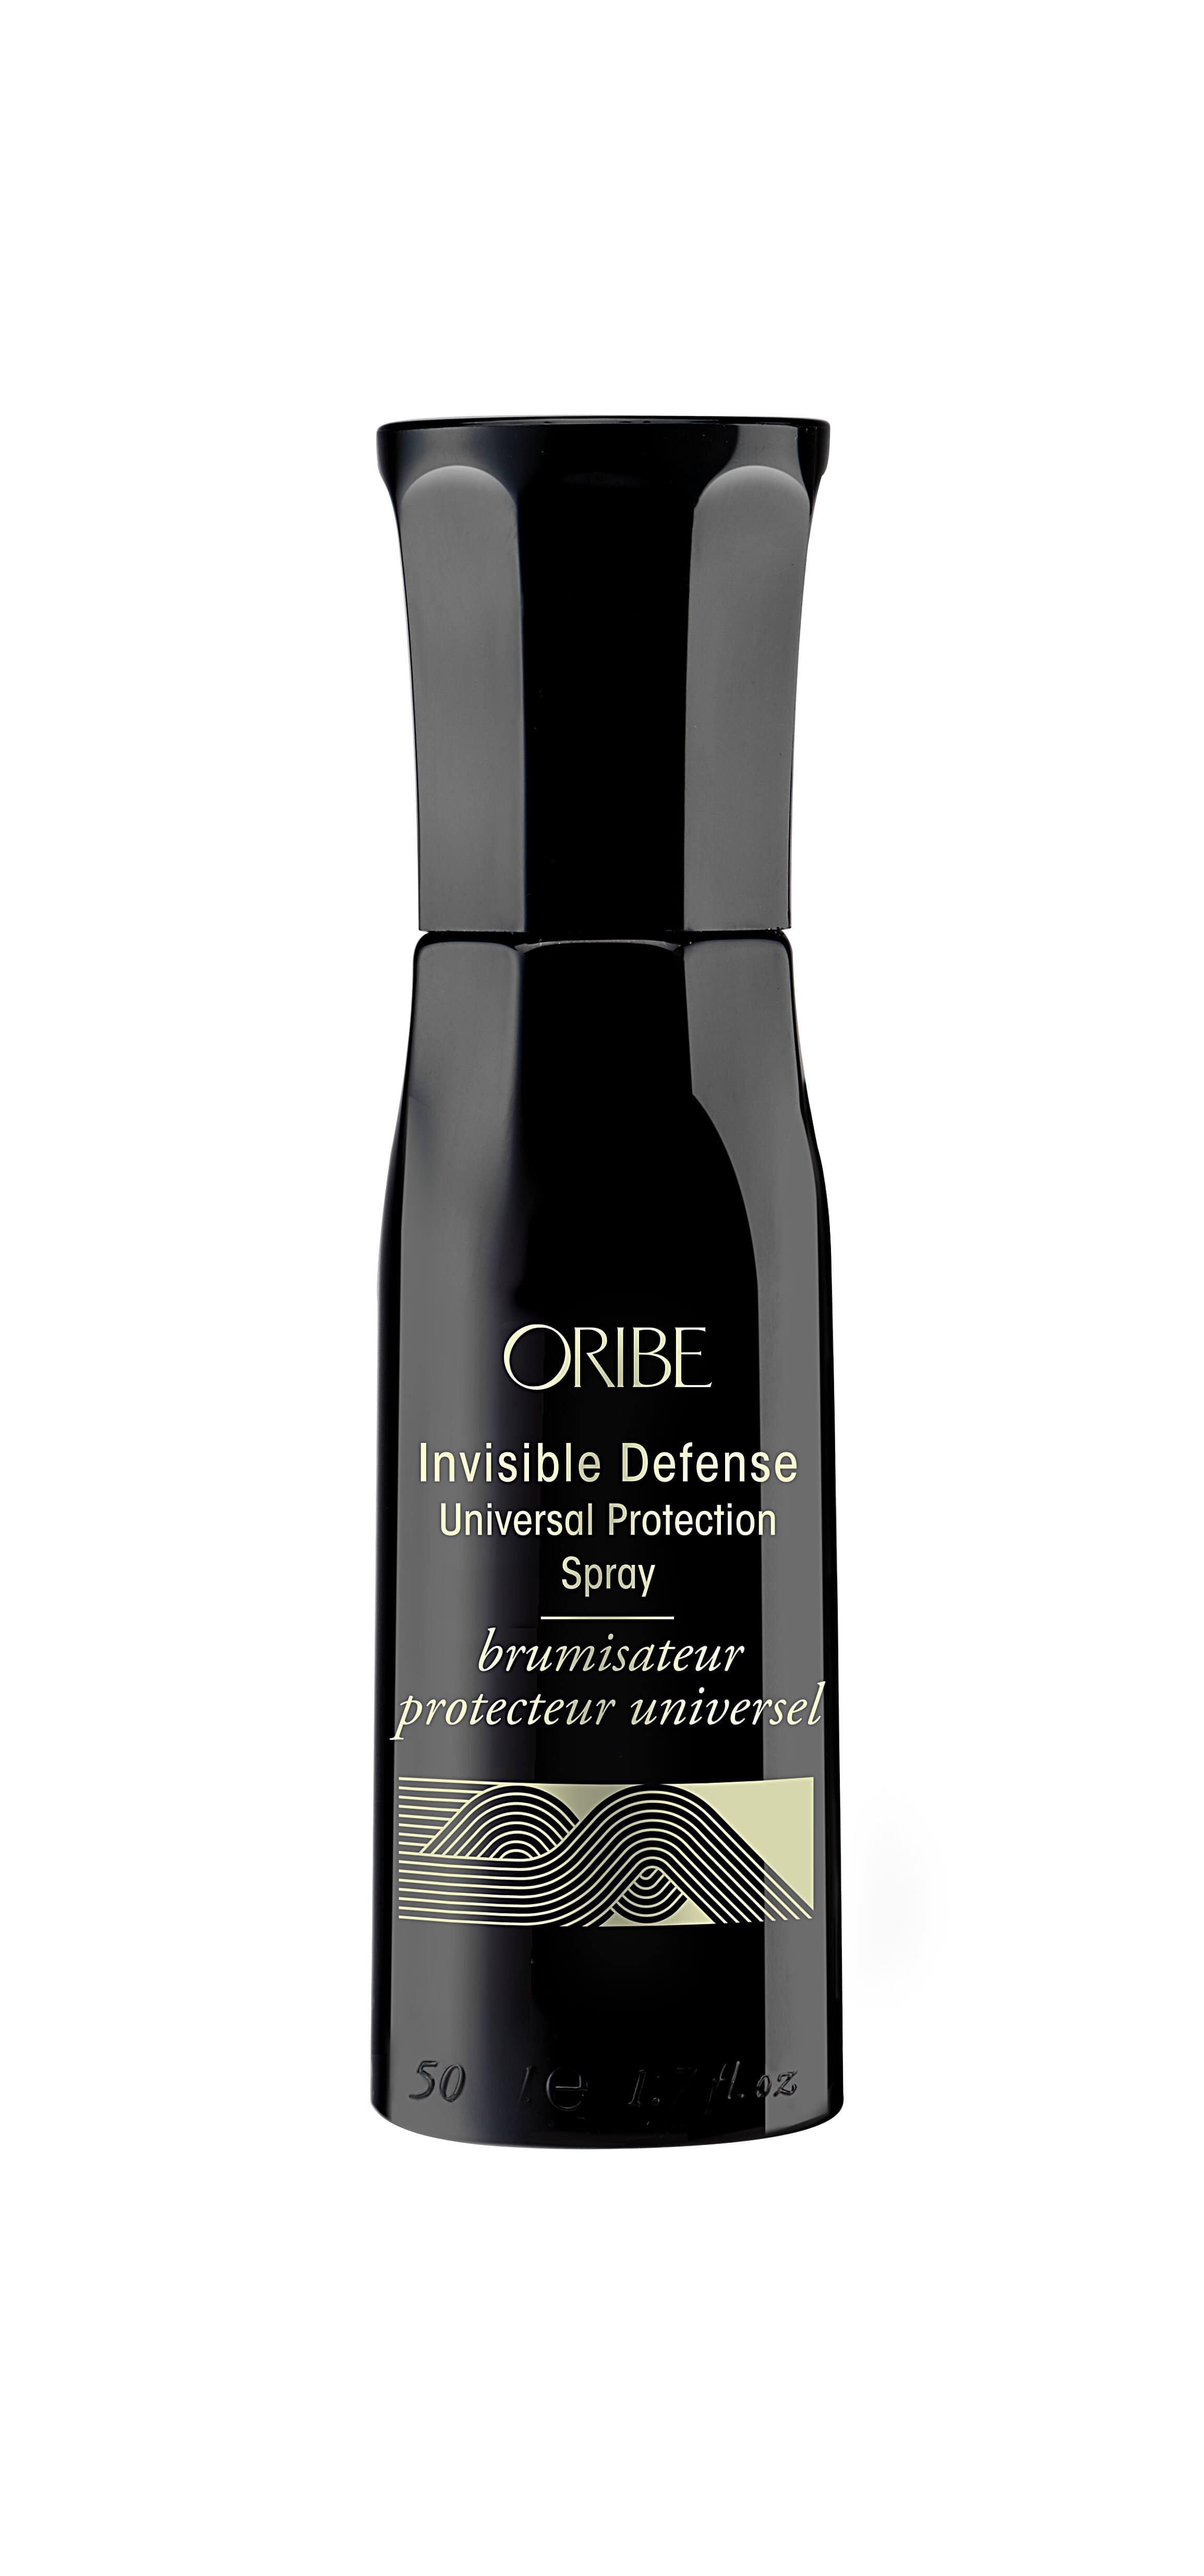 Invisible Defense Universal Protection Spray by Oribe